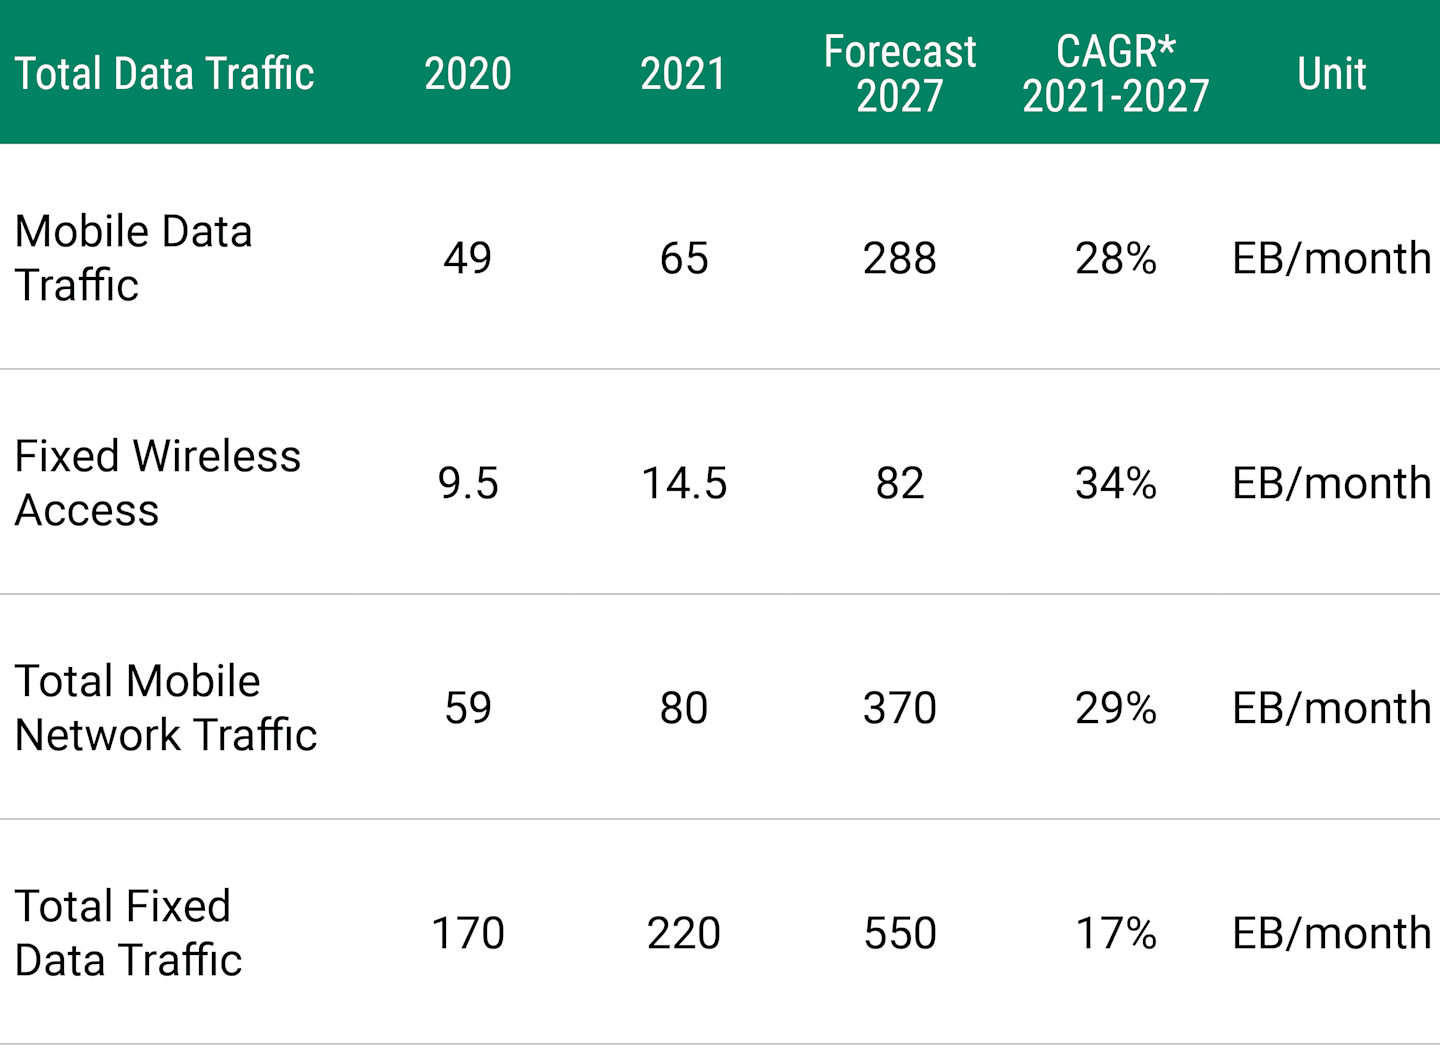 Total data traffic in exabytes per month for mobile data, fixed wireless access, mobile network and fixed data traffic. Data traffic shown for 2020, 2021, and 2027 (forecasted) with compound annual growth rate from 2021 to 2027. 